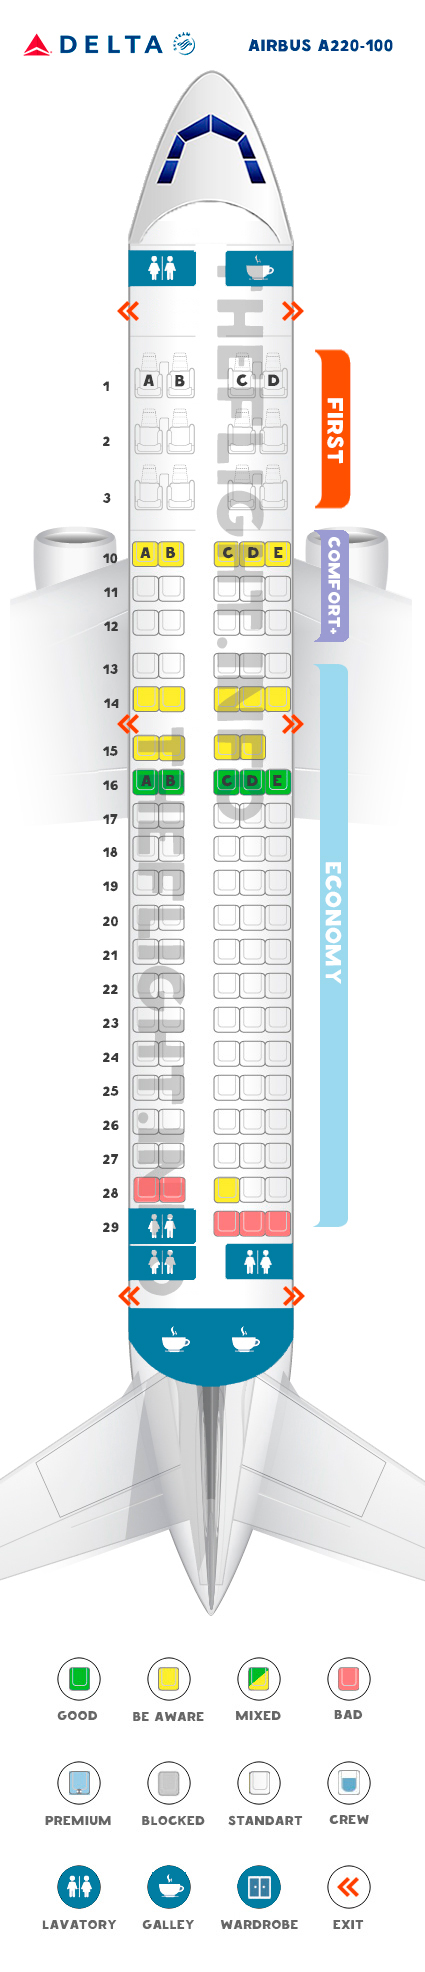 A Airplane Seat Map Image To U